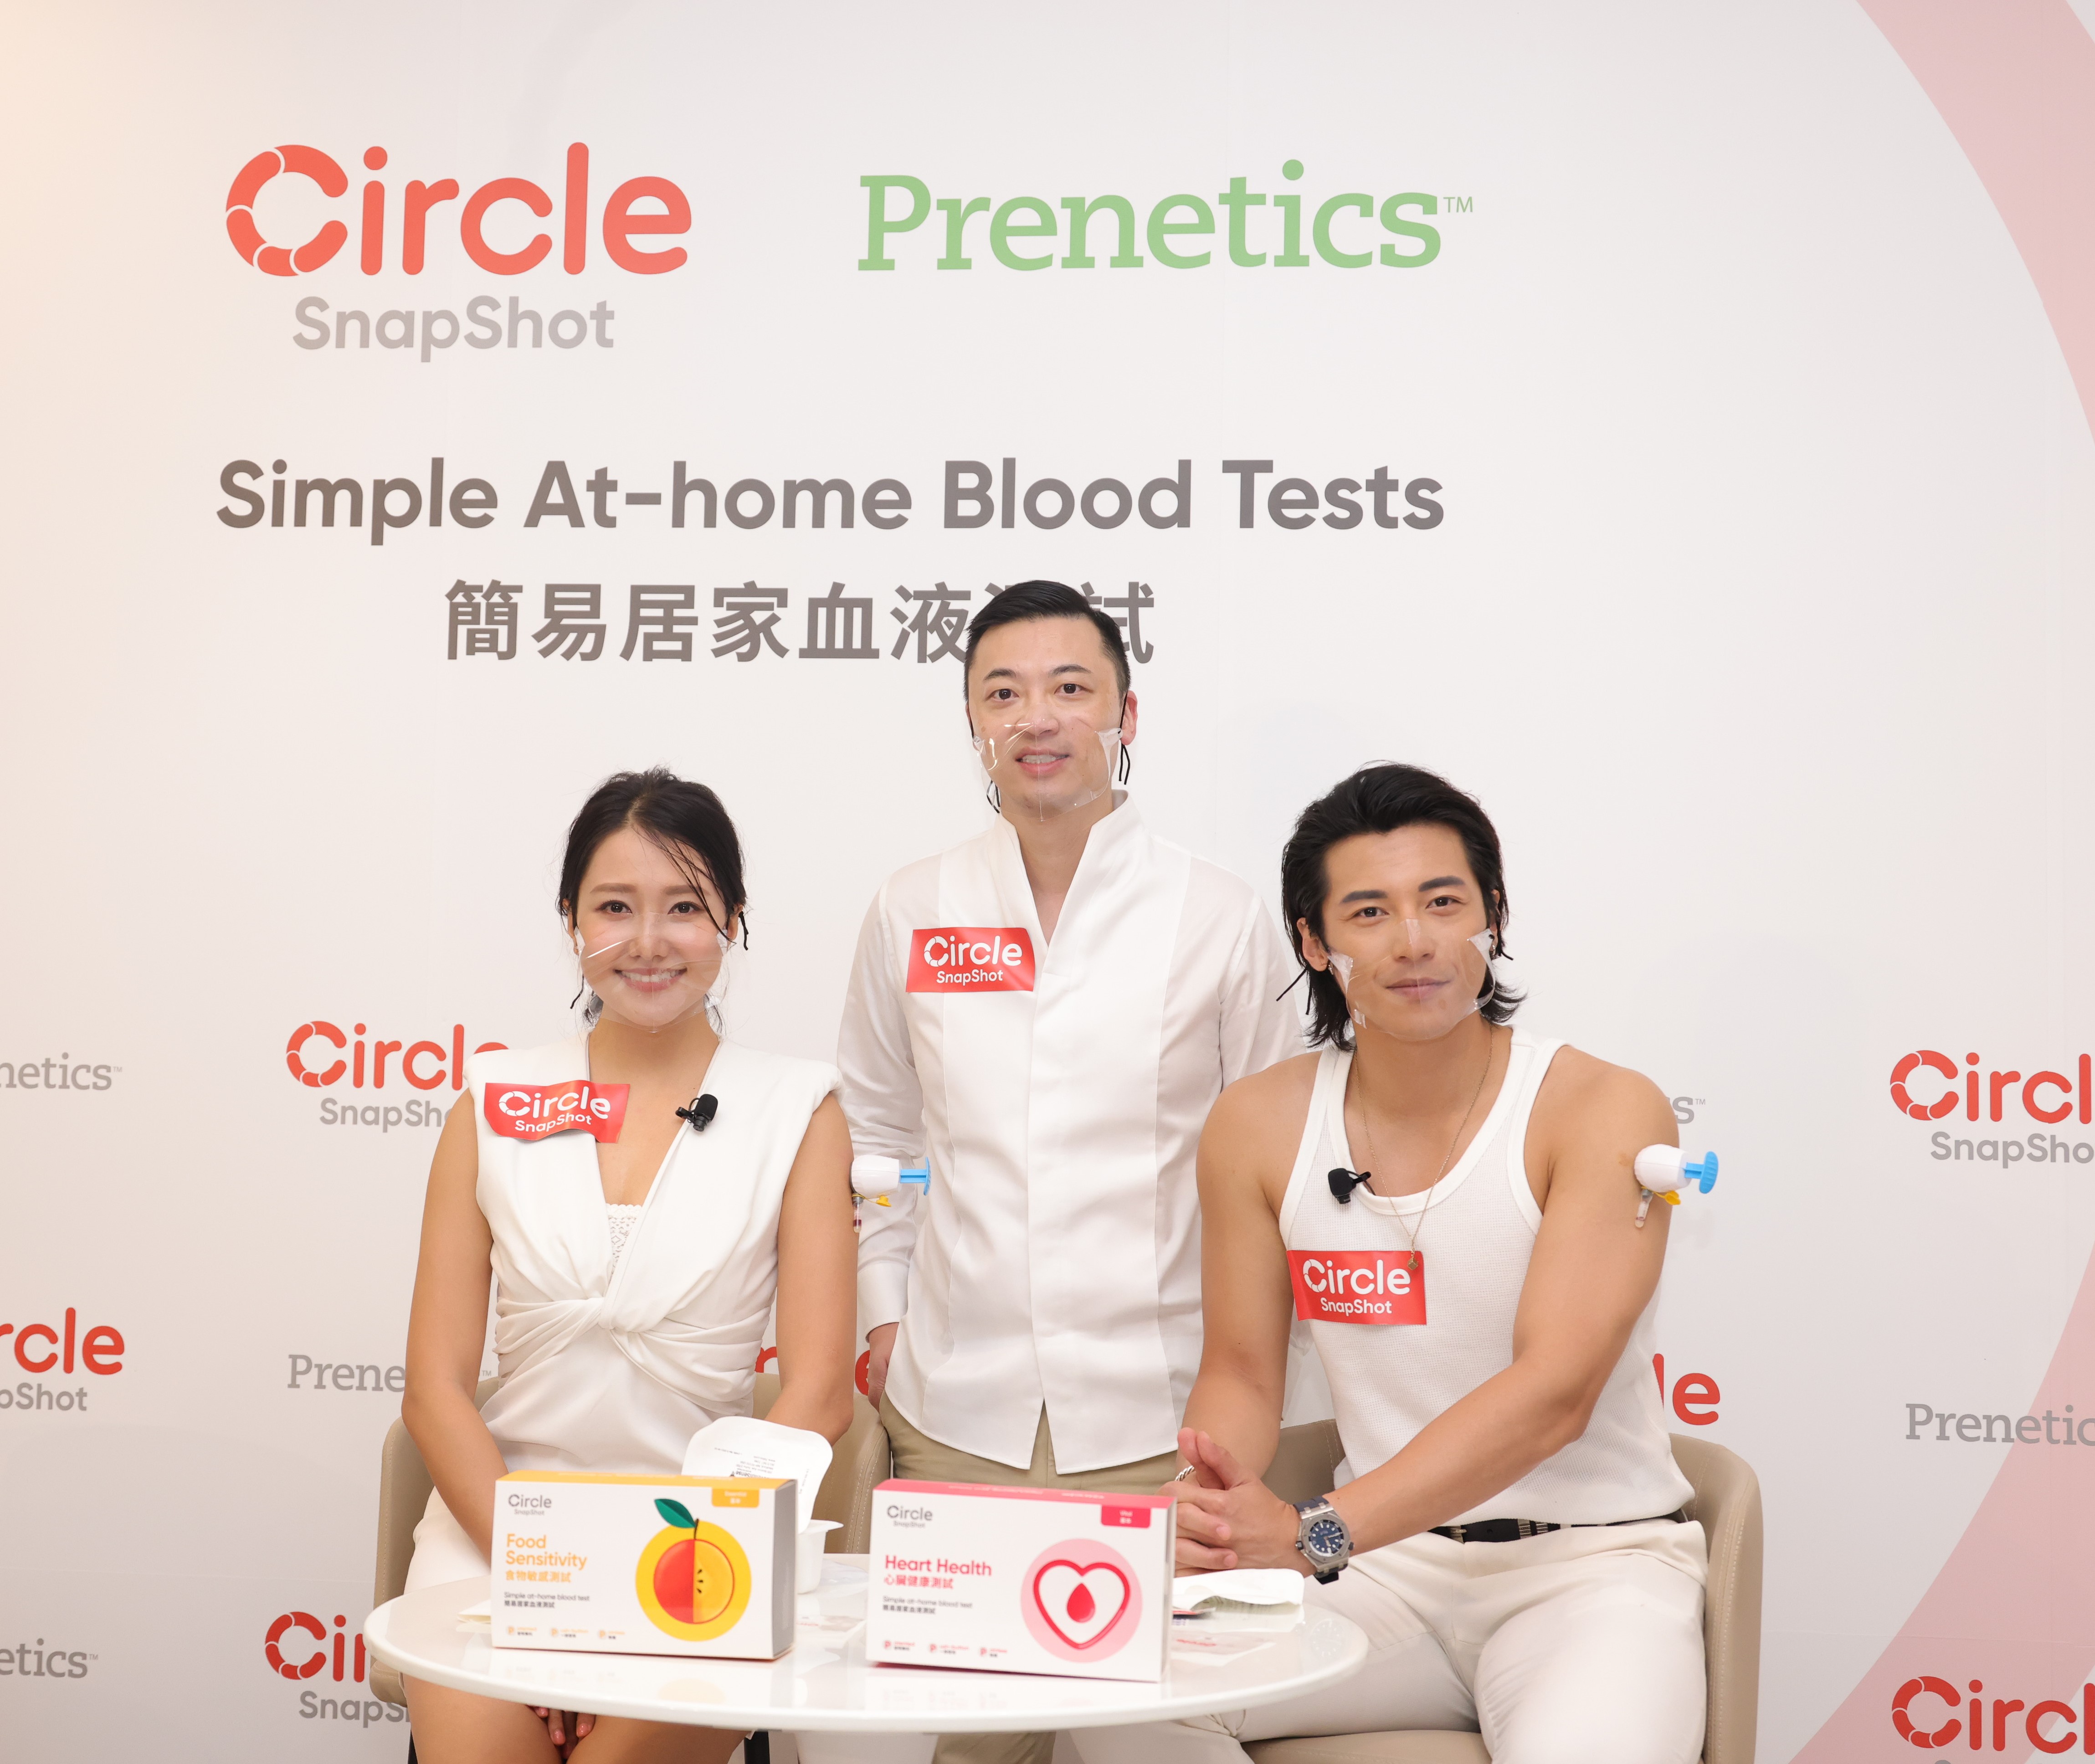 (From left) User Virginia Lau, Mr. Danny Yeung, CEO and Co-Founder, Prenetics and Jeremy Wong recommend Circle SnapShot simple at-home blood tests which enable health tests to be simple, convenient and painless for the first time.